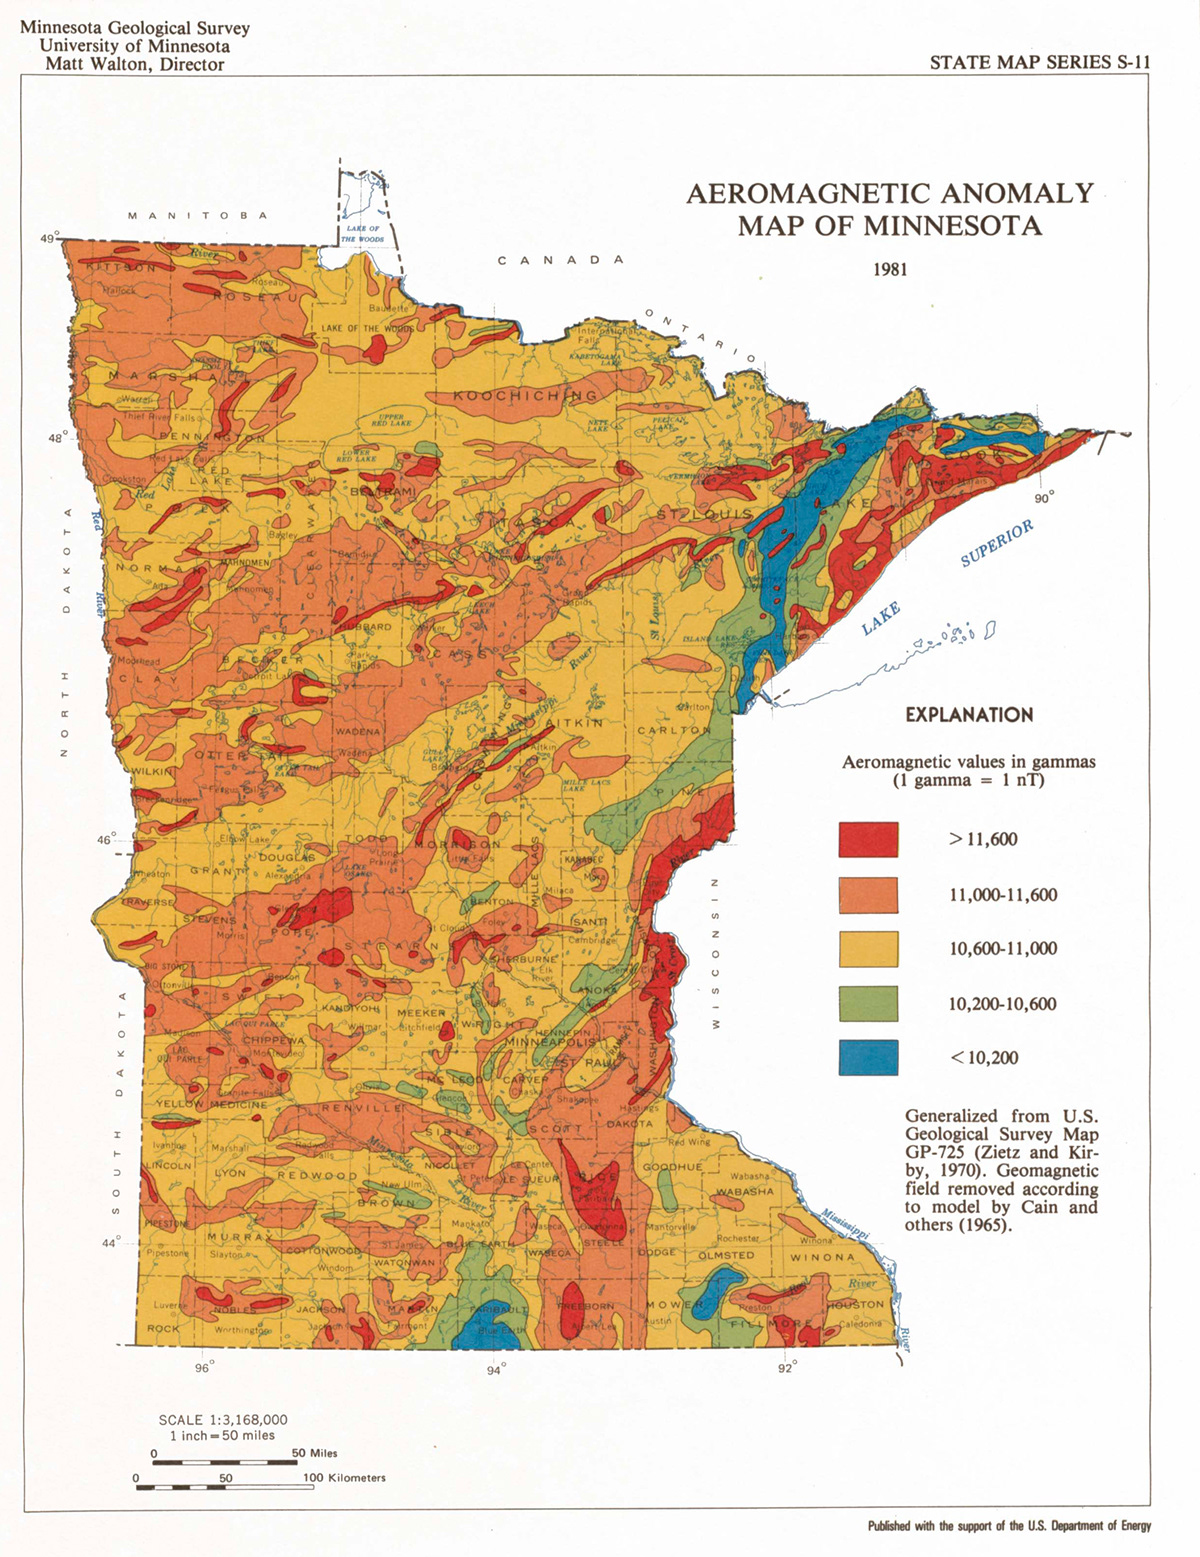 Minnesota Geological Survey geologic maps  hydrogeological map  quaternary hydrogeology minnesota bouguer gravity map  aeromagnetic map physiographic map  scott county Patricia Isaacs